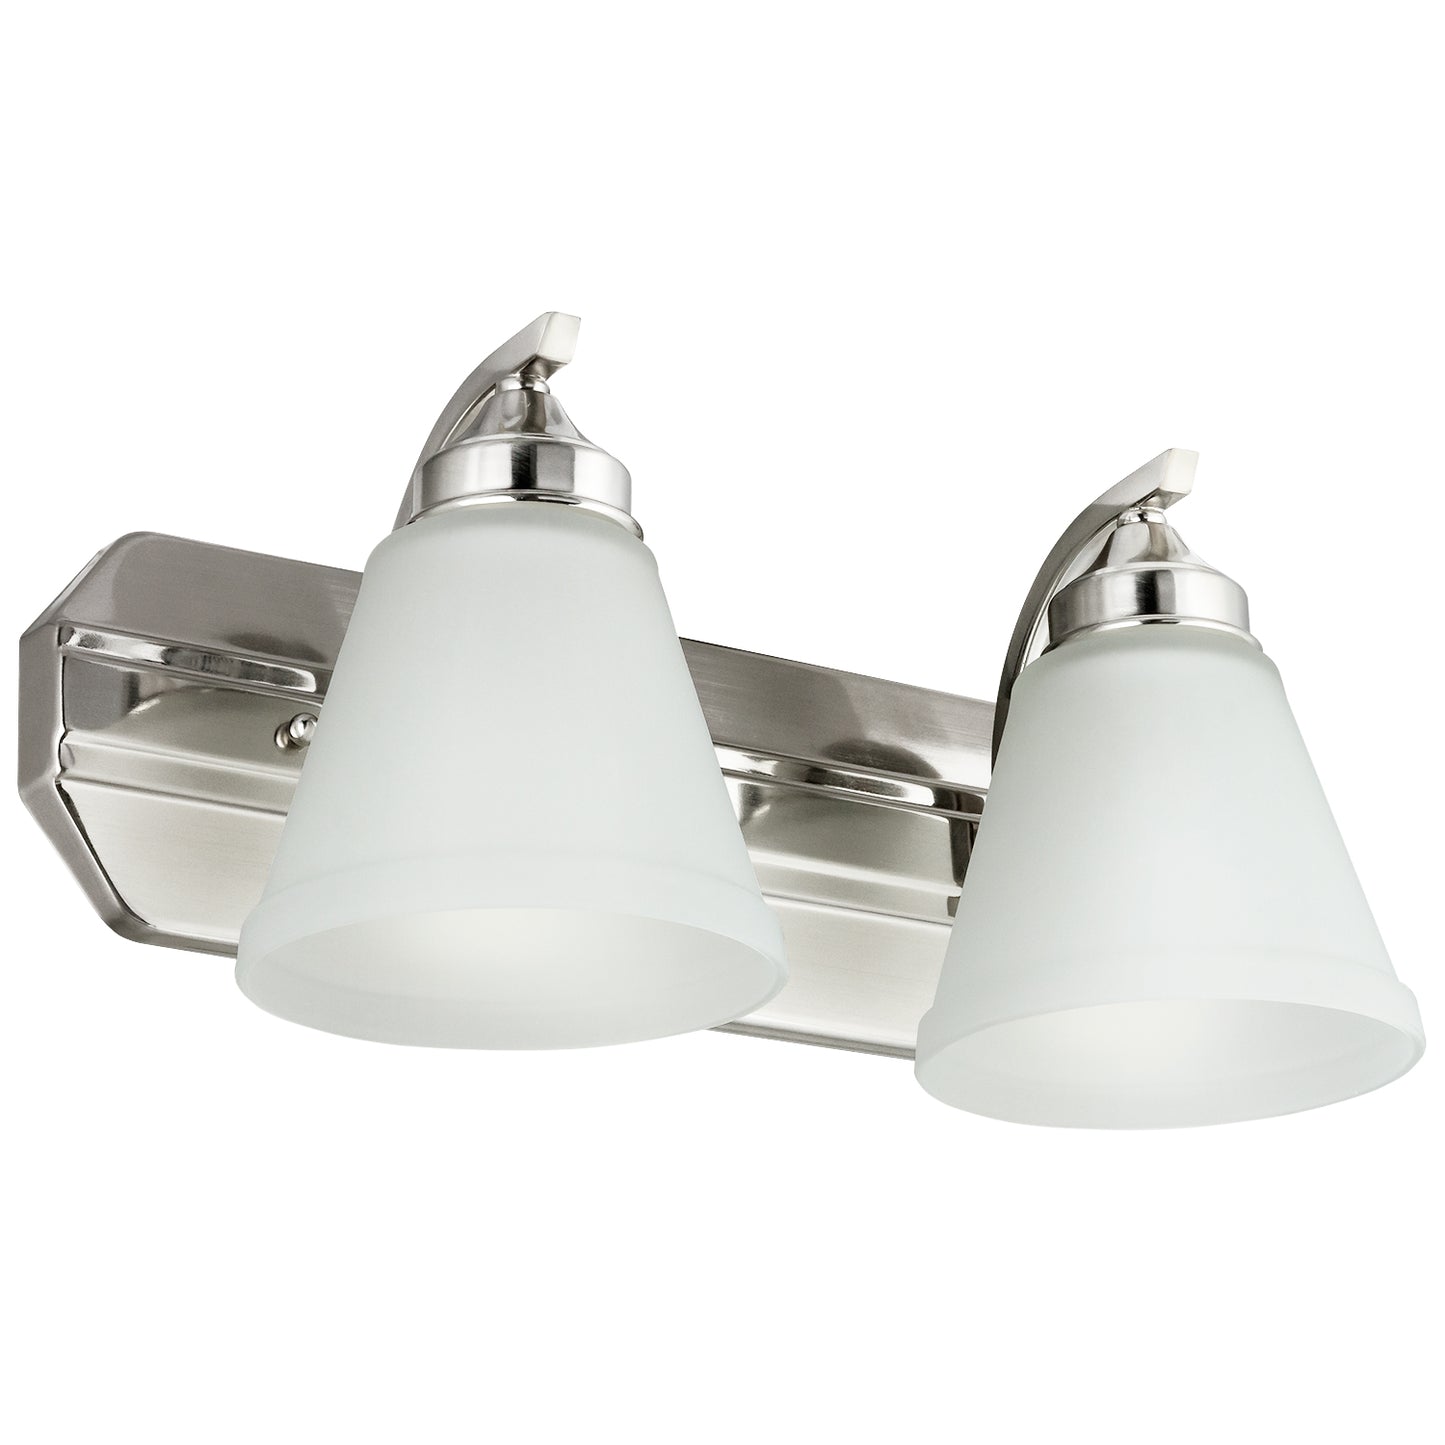 Sunlite - Modern Bell Vanity Fixture Frosted Glass Shade, 2 Light Brushed Nickel Finish